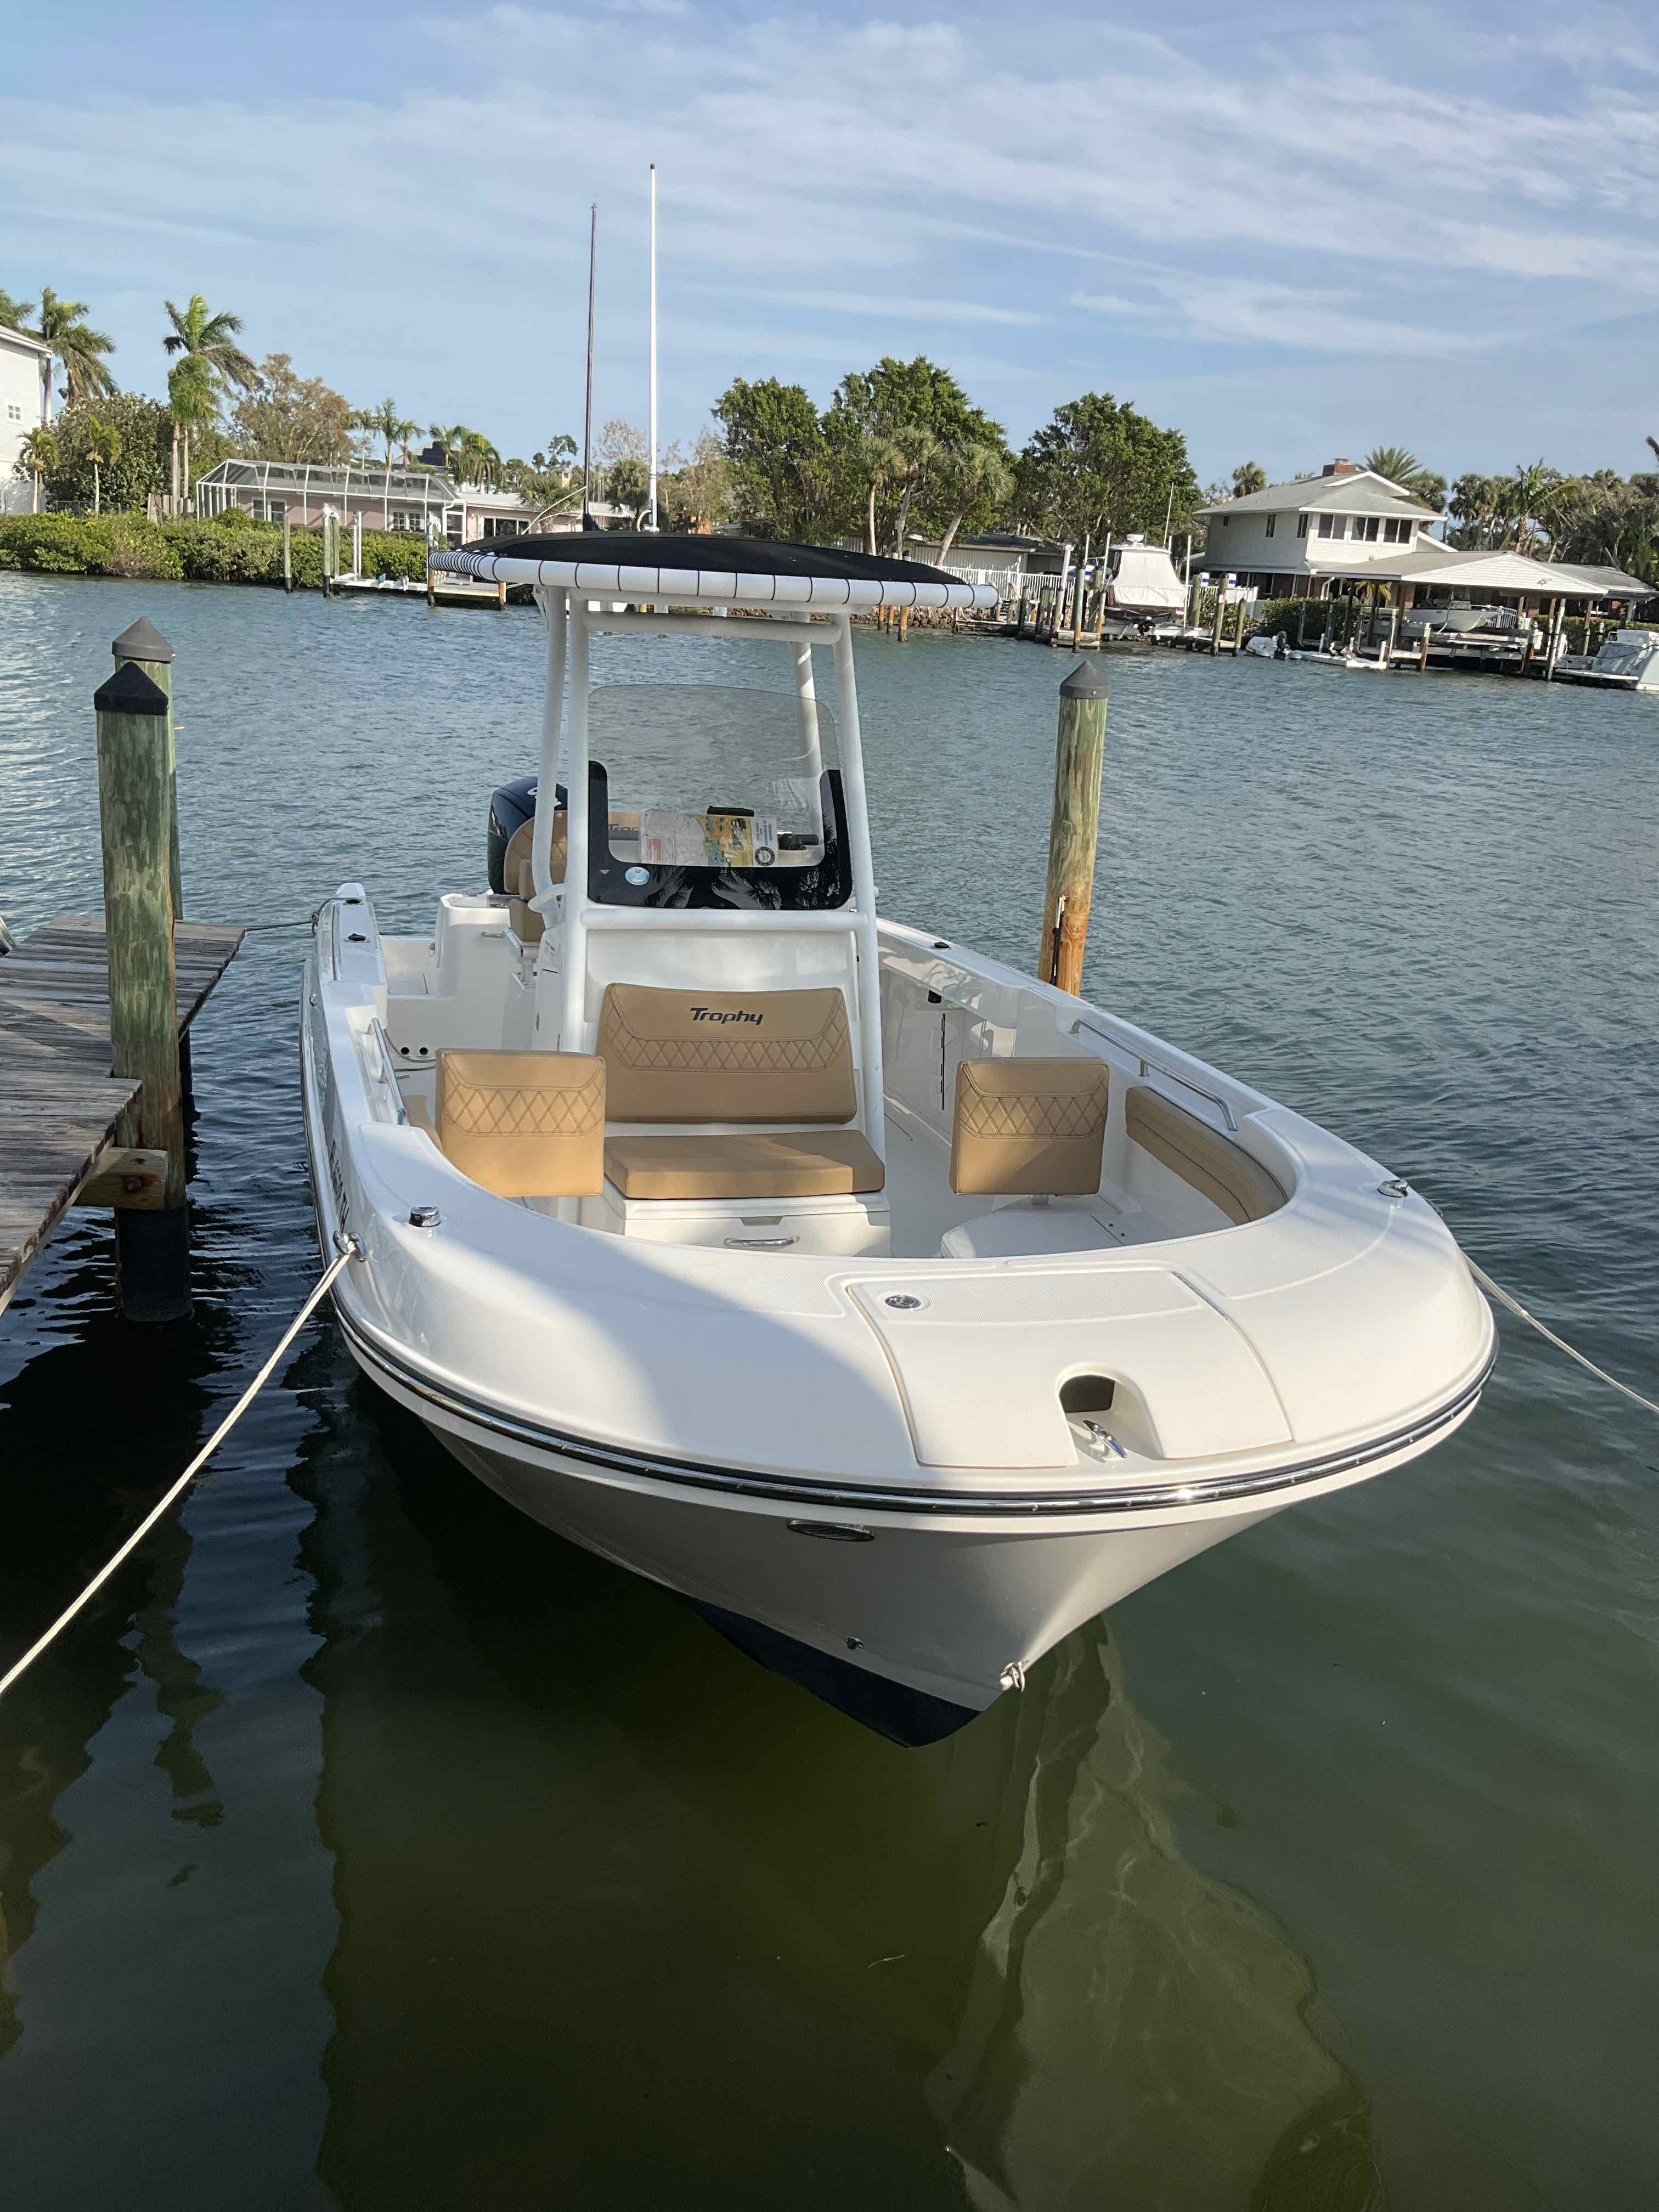 RIDE THE WIND (24FT Offshore Bayliner Trophy Center Console - 150 HP~Fishing)